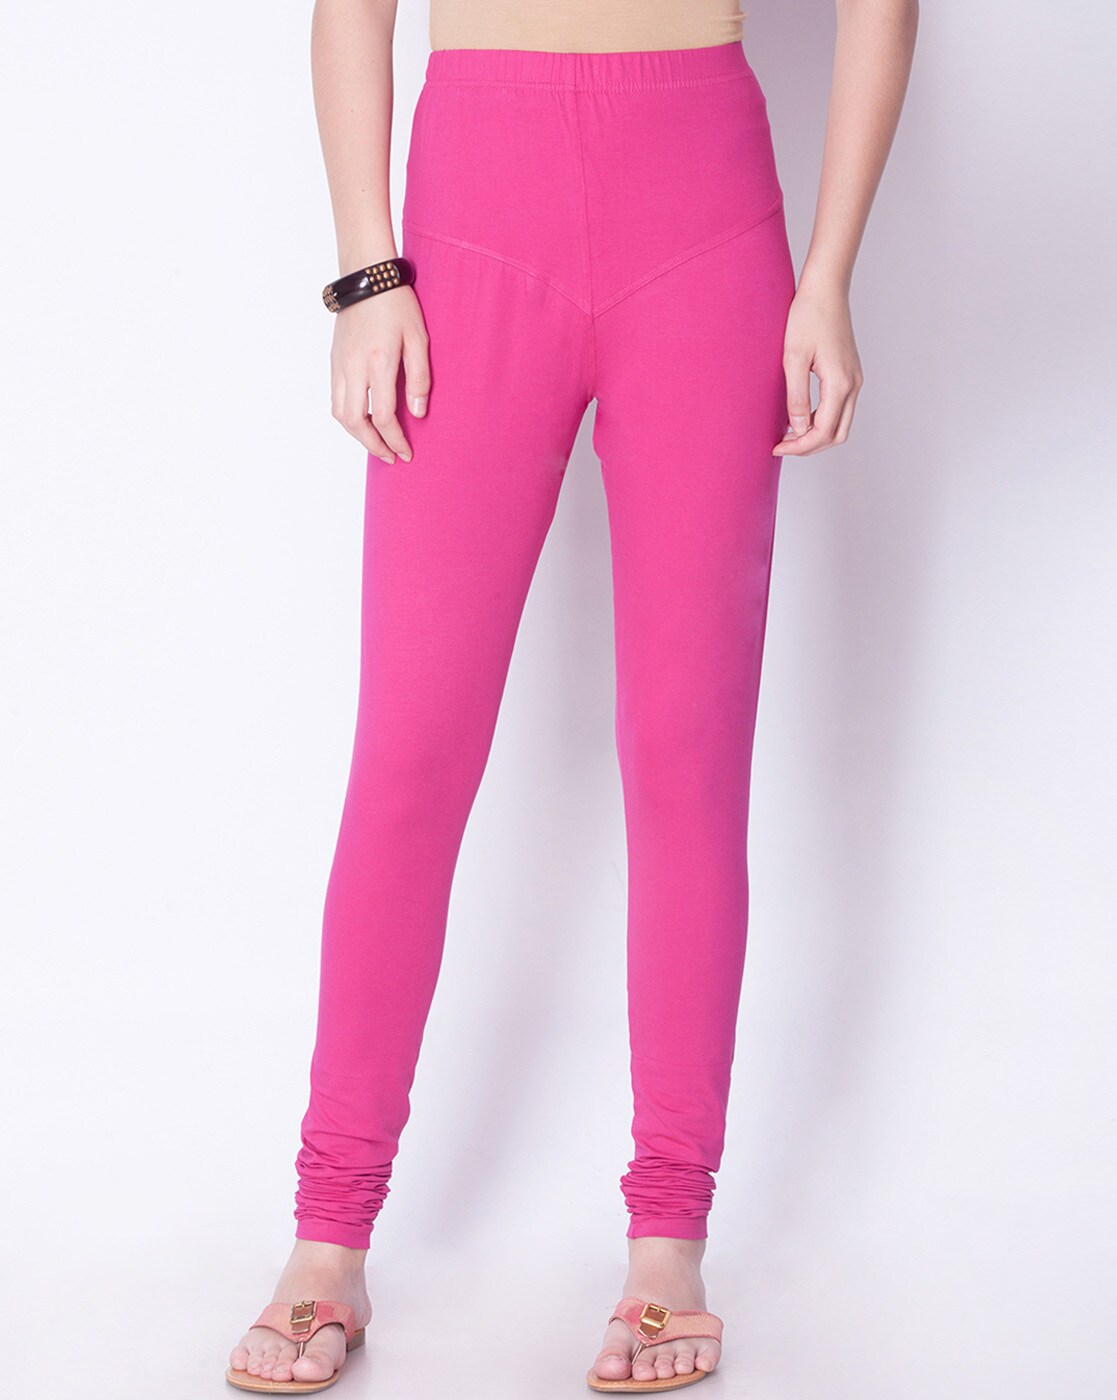 Gorgeous Girl Pink Leggings – She Is Boutique-thanhphatduhoc.com.vn